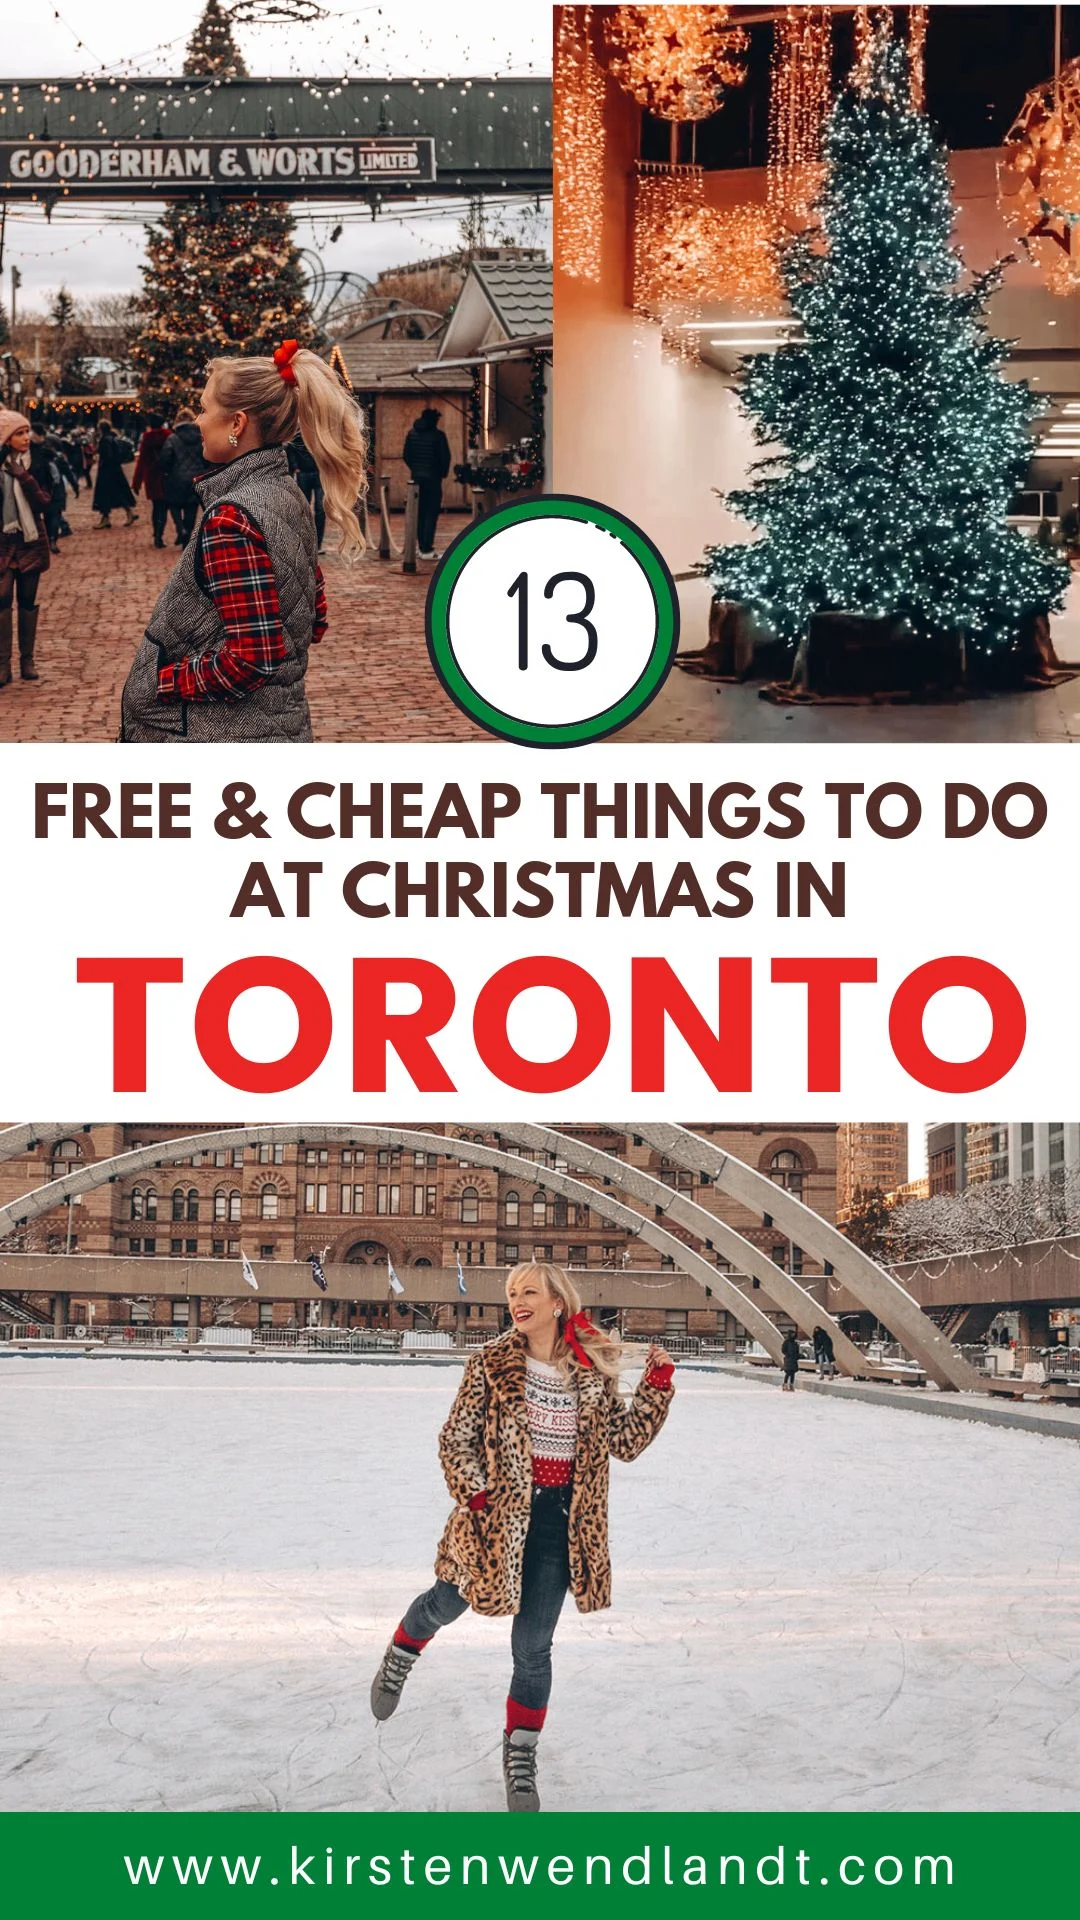 Looking for some cheap & free things in Toronto at Christmas time? This guide is for you! Toronto has so many incredibly fun & festive yet affordable activities to do during the Christmas season. From the Santa Claus parade to magical light displays, this guide includes all of the free and cheap activities to do in Toronto this holiday season.